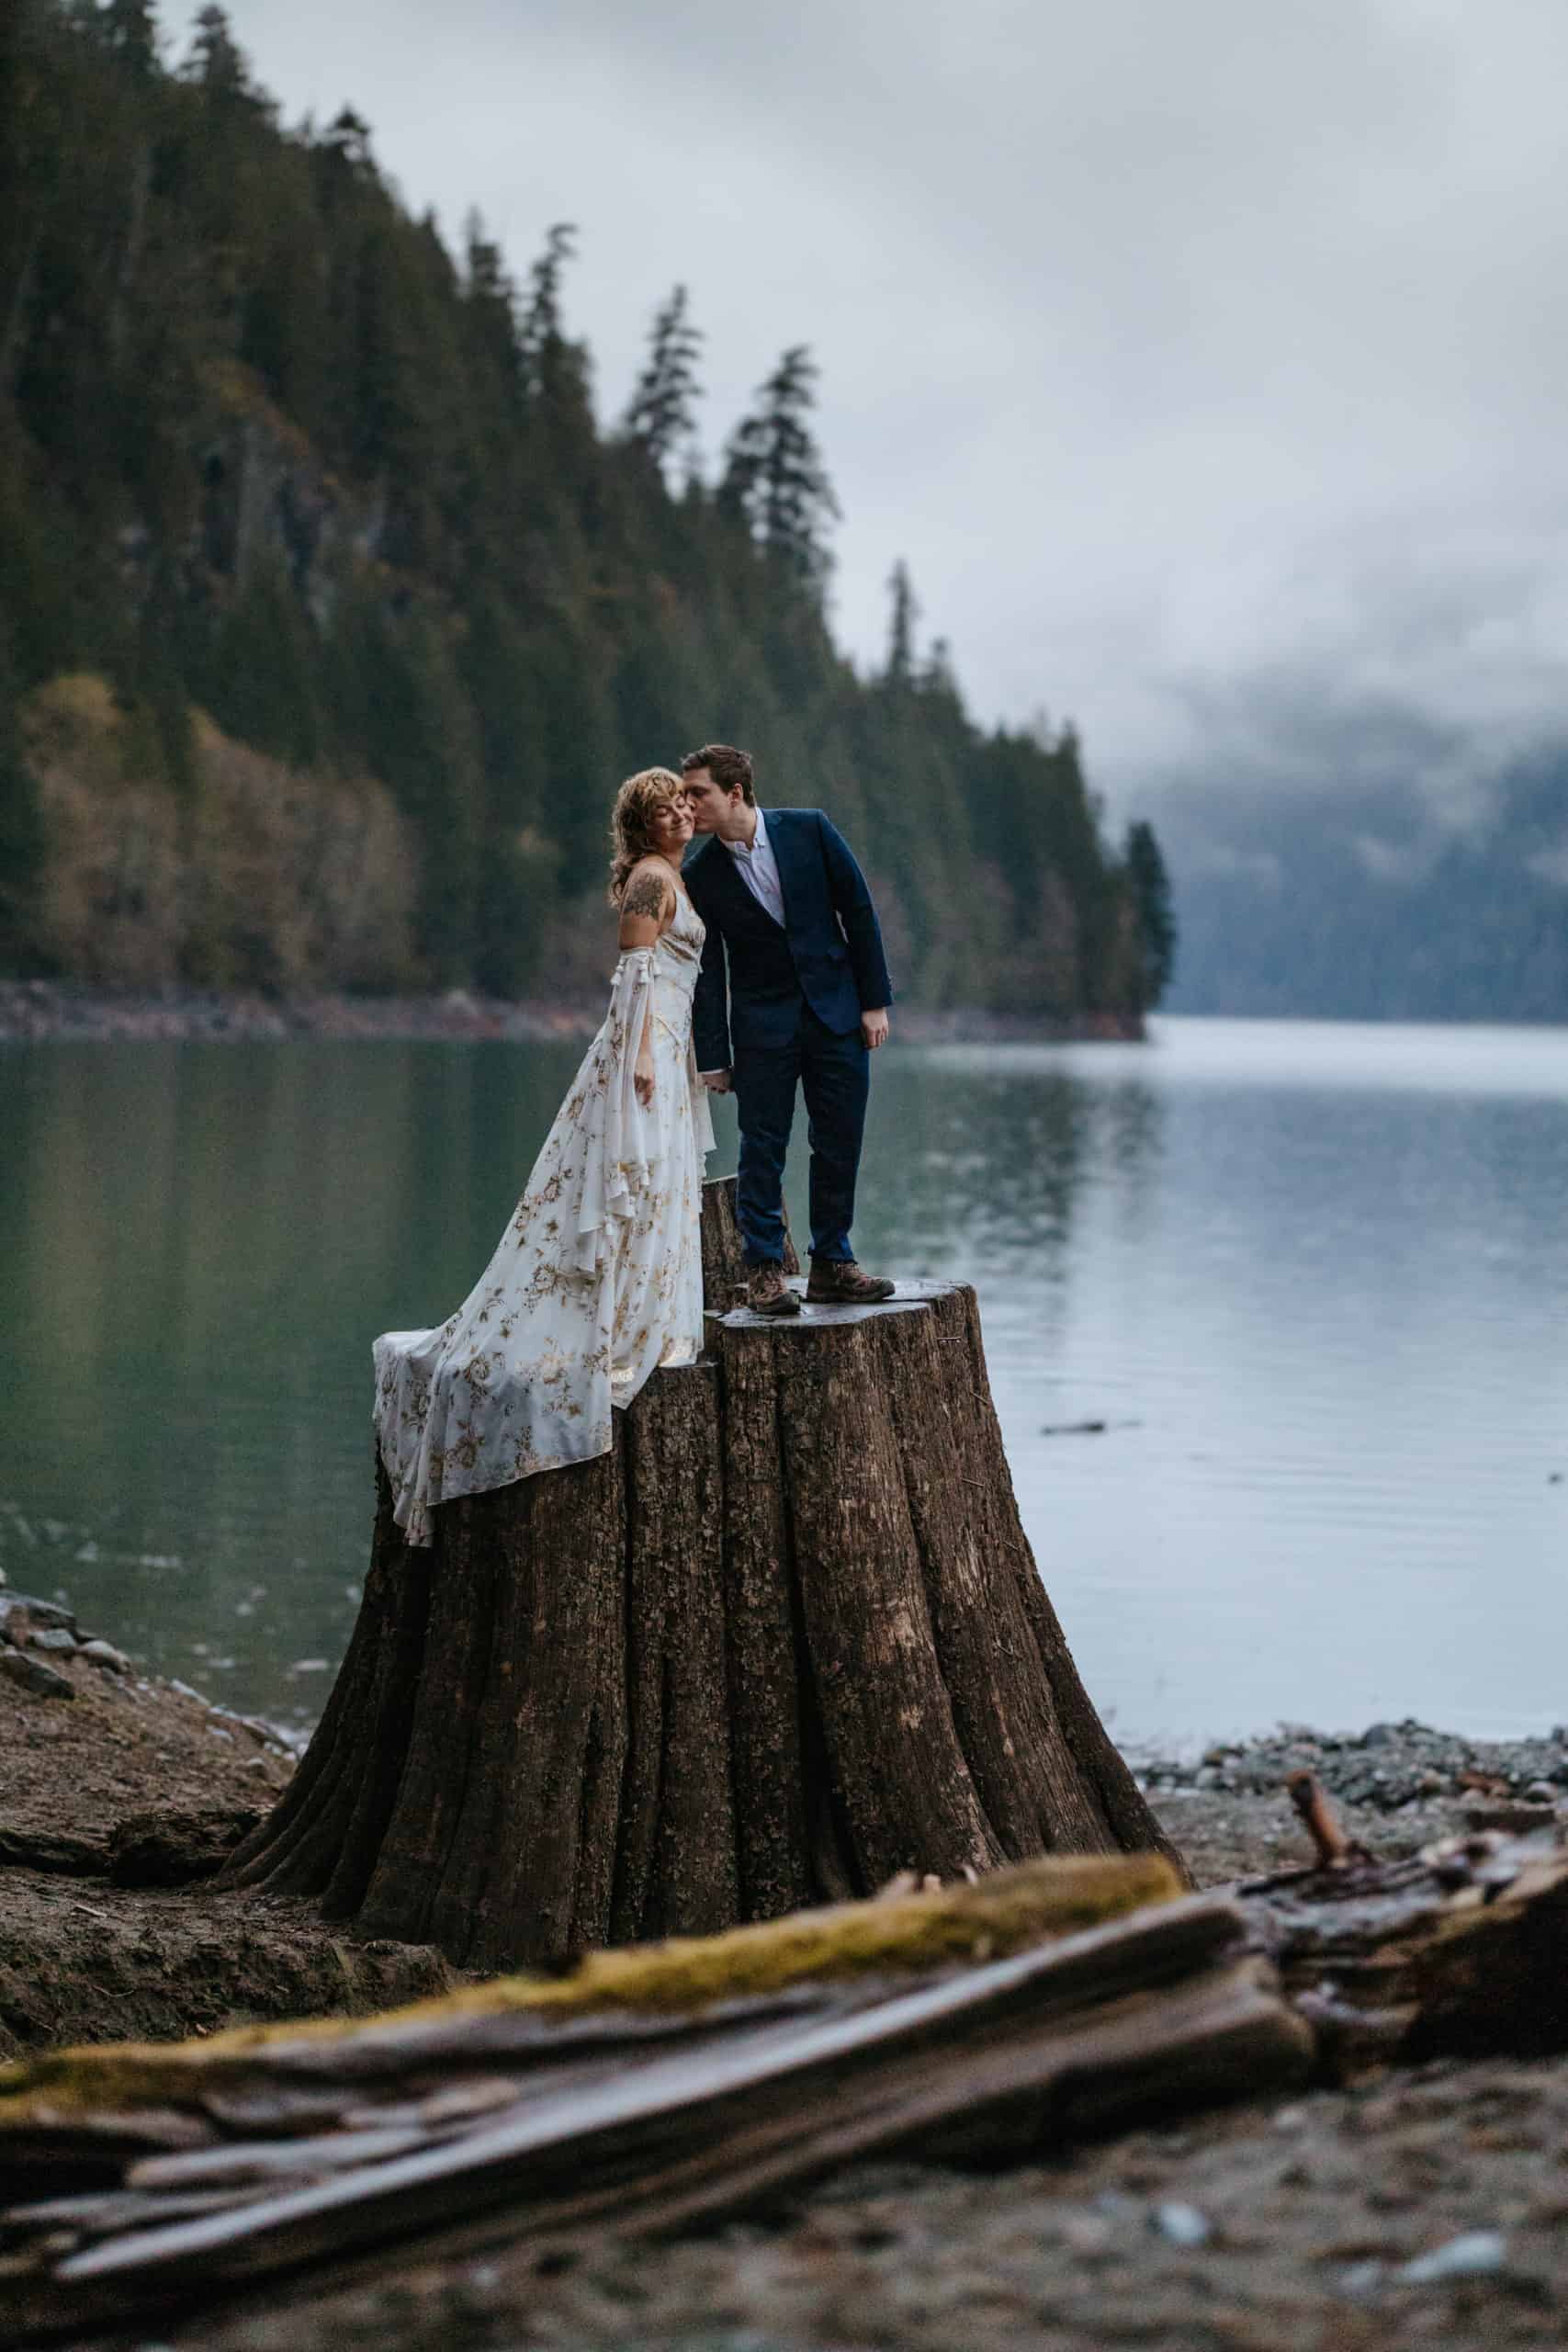 a couple kissing on a tree stump, the ocean in the background.